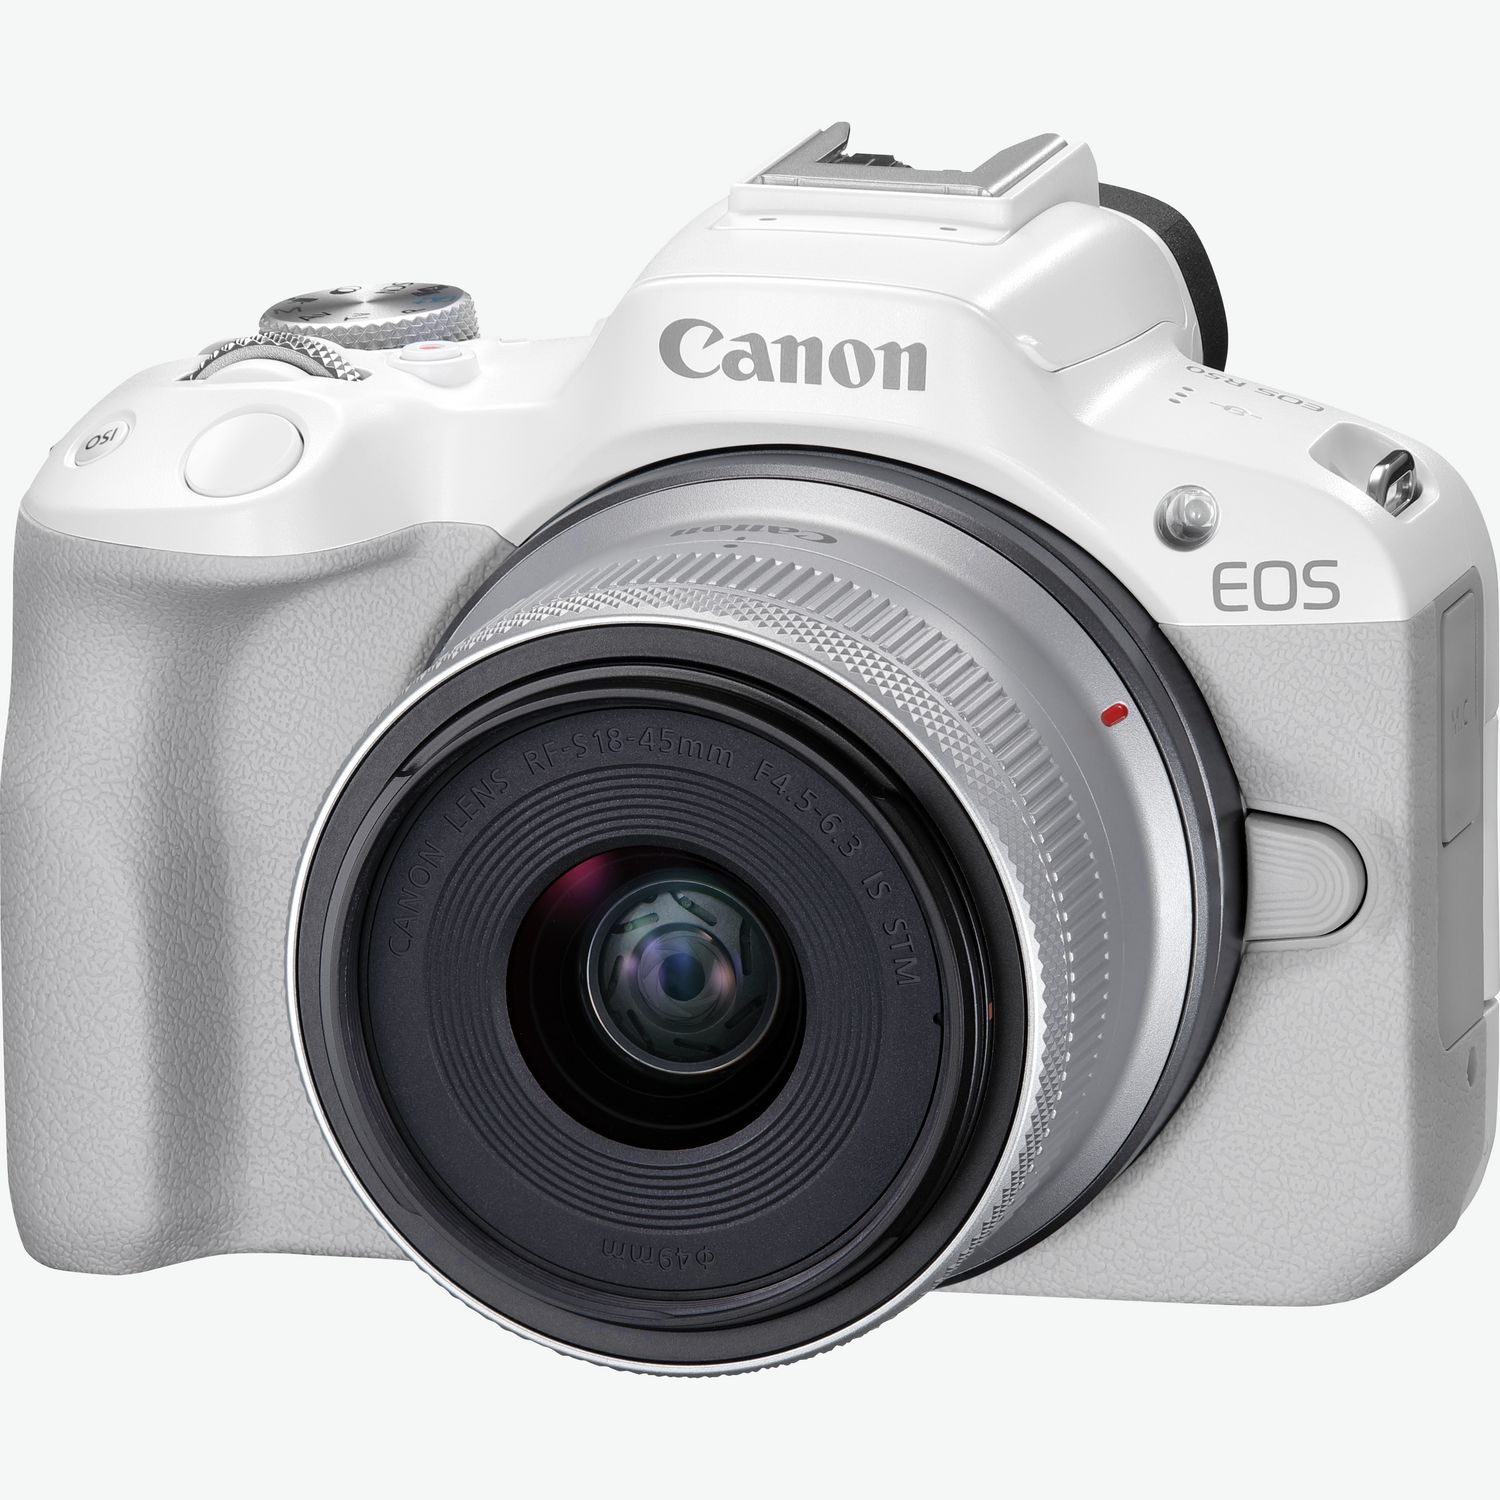 Specifications & Features - Canon EOS M50 Mark II - Canon Ireland